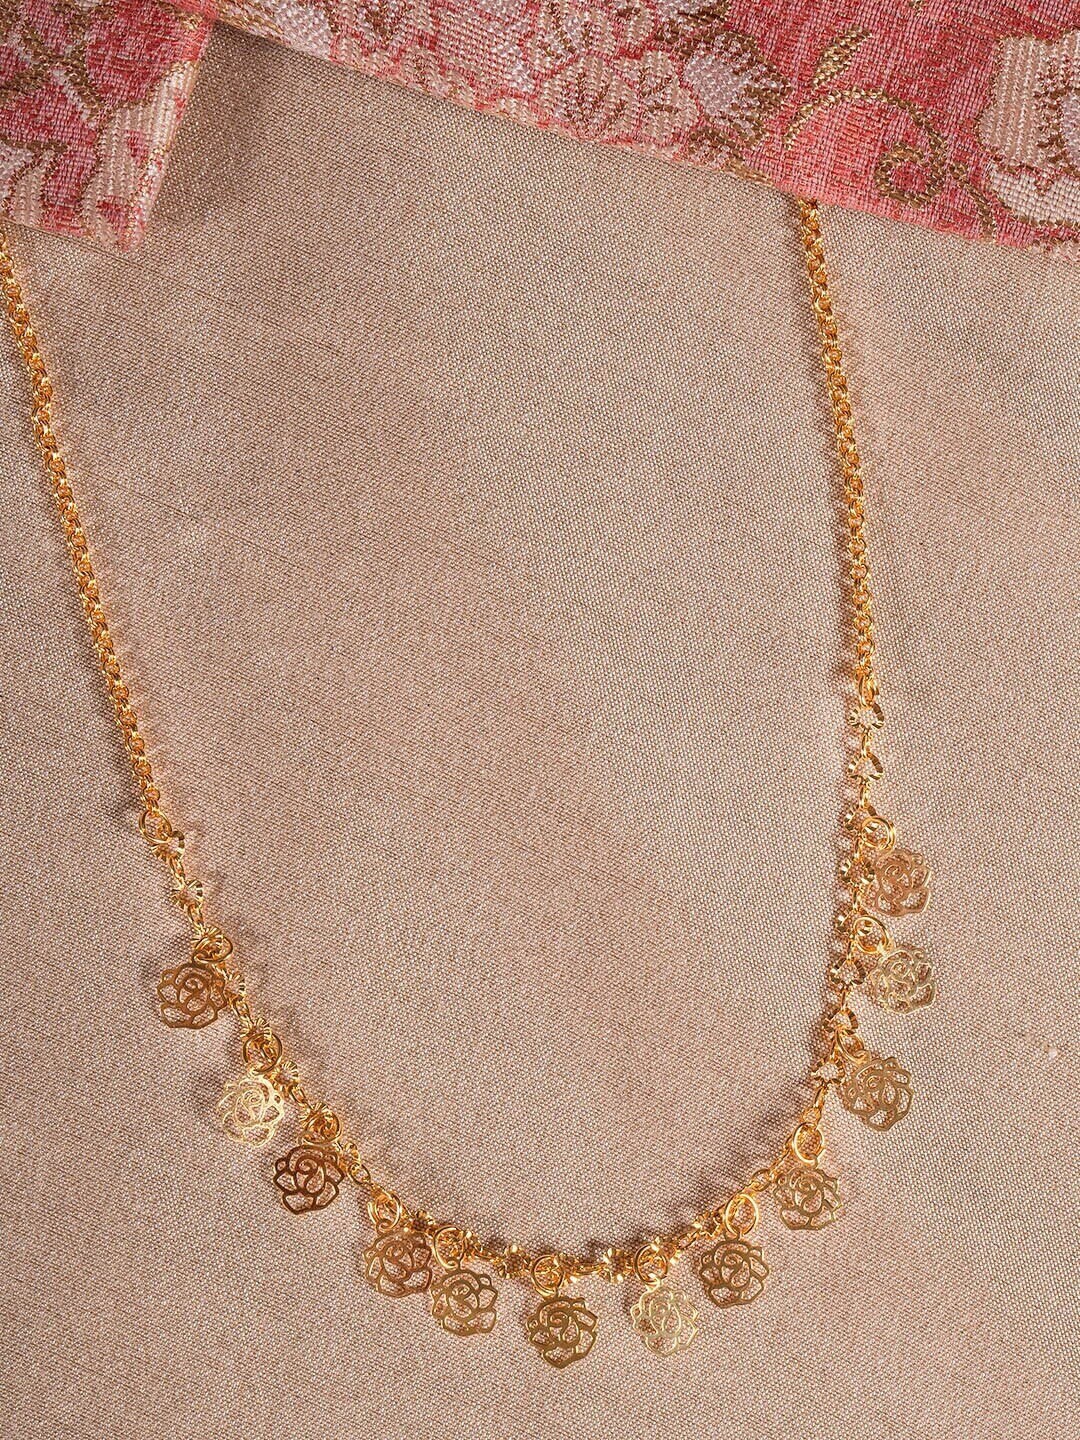 Shoshaa Brass Gold-Plated Chain Price in India